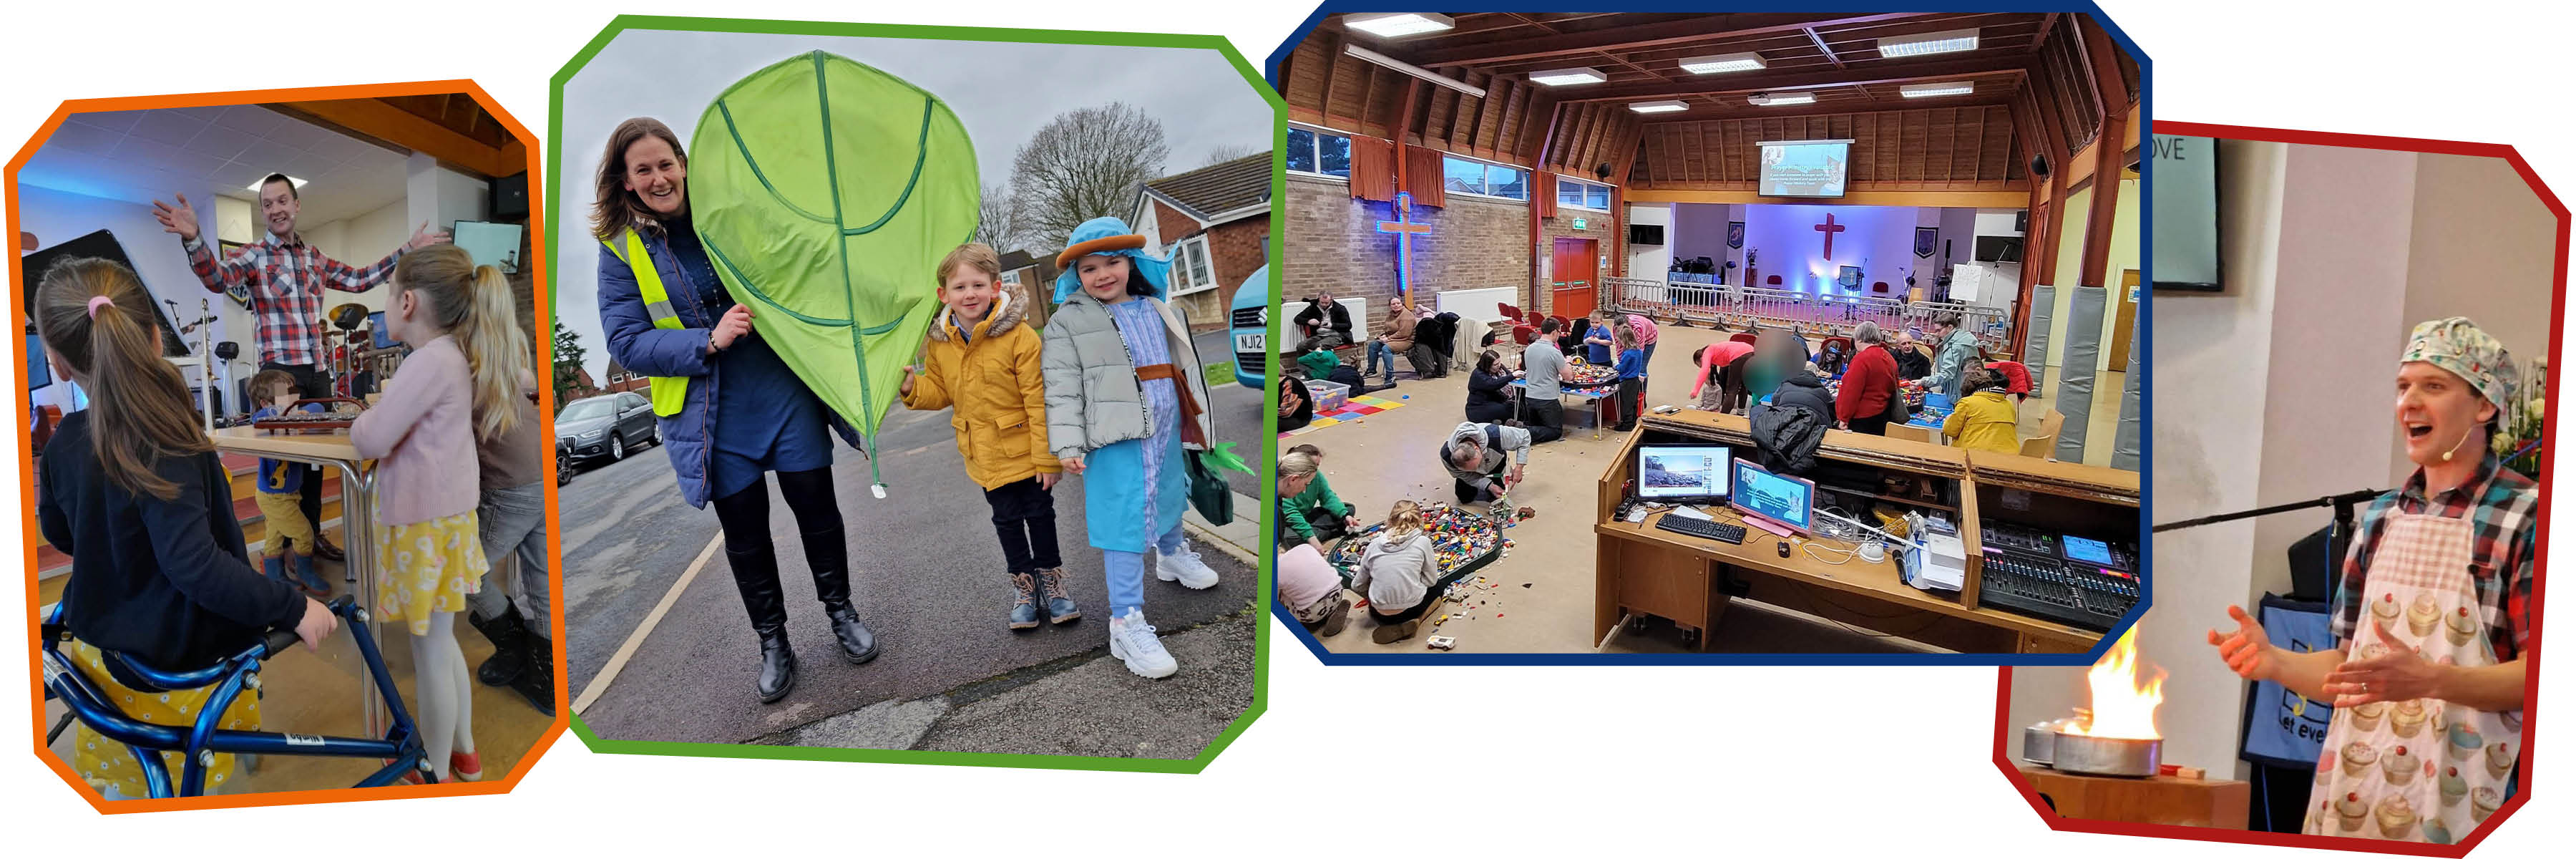 Collage of images including 1) two girls making art 2) woman and two children on a residential pavement with a balloon-shaped kite 3) view of the worship area with adults and children in group activities 4) vicar wearing chefs hat and apron